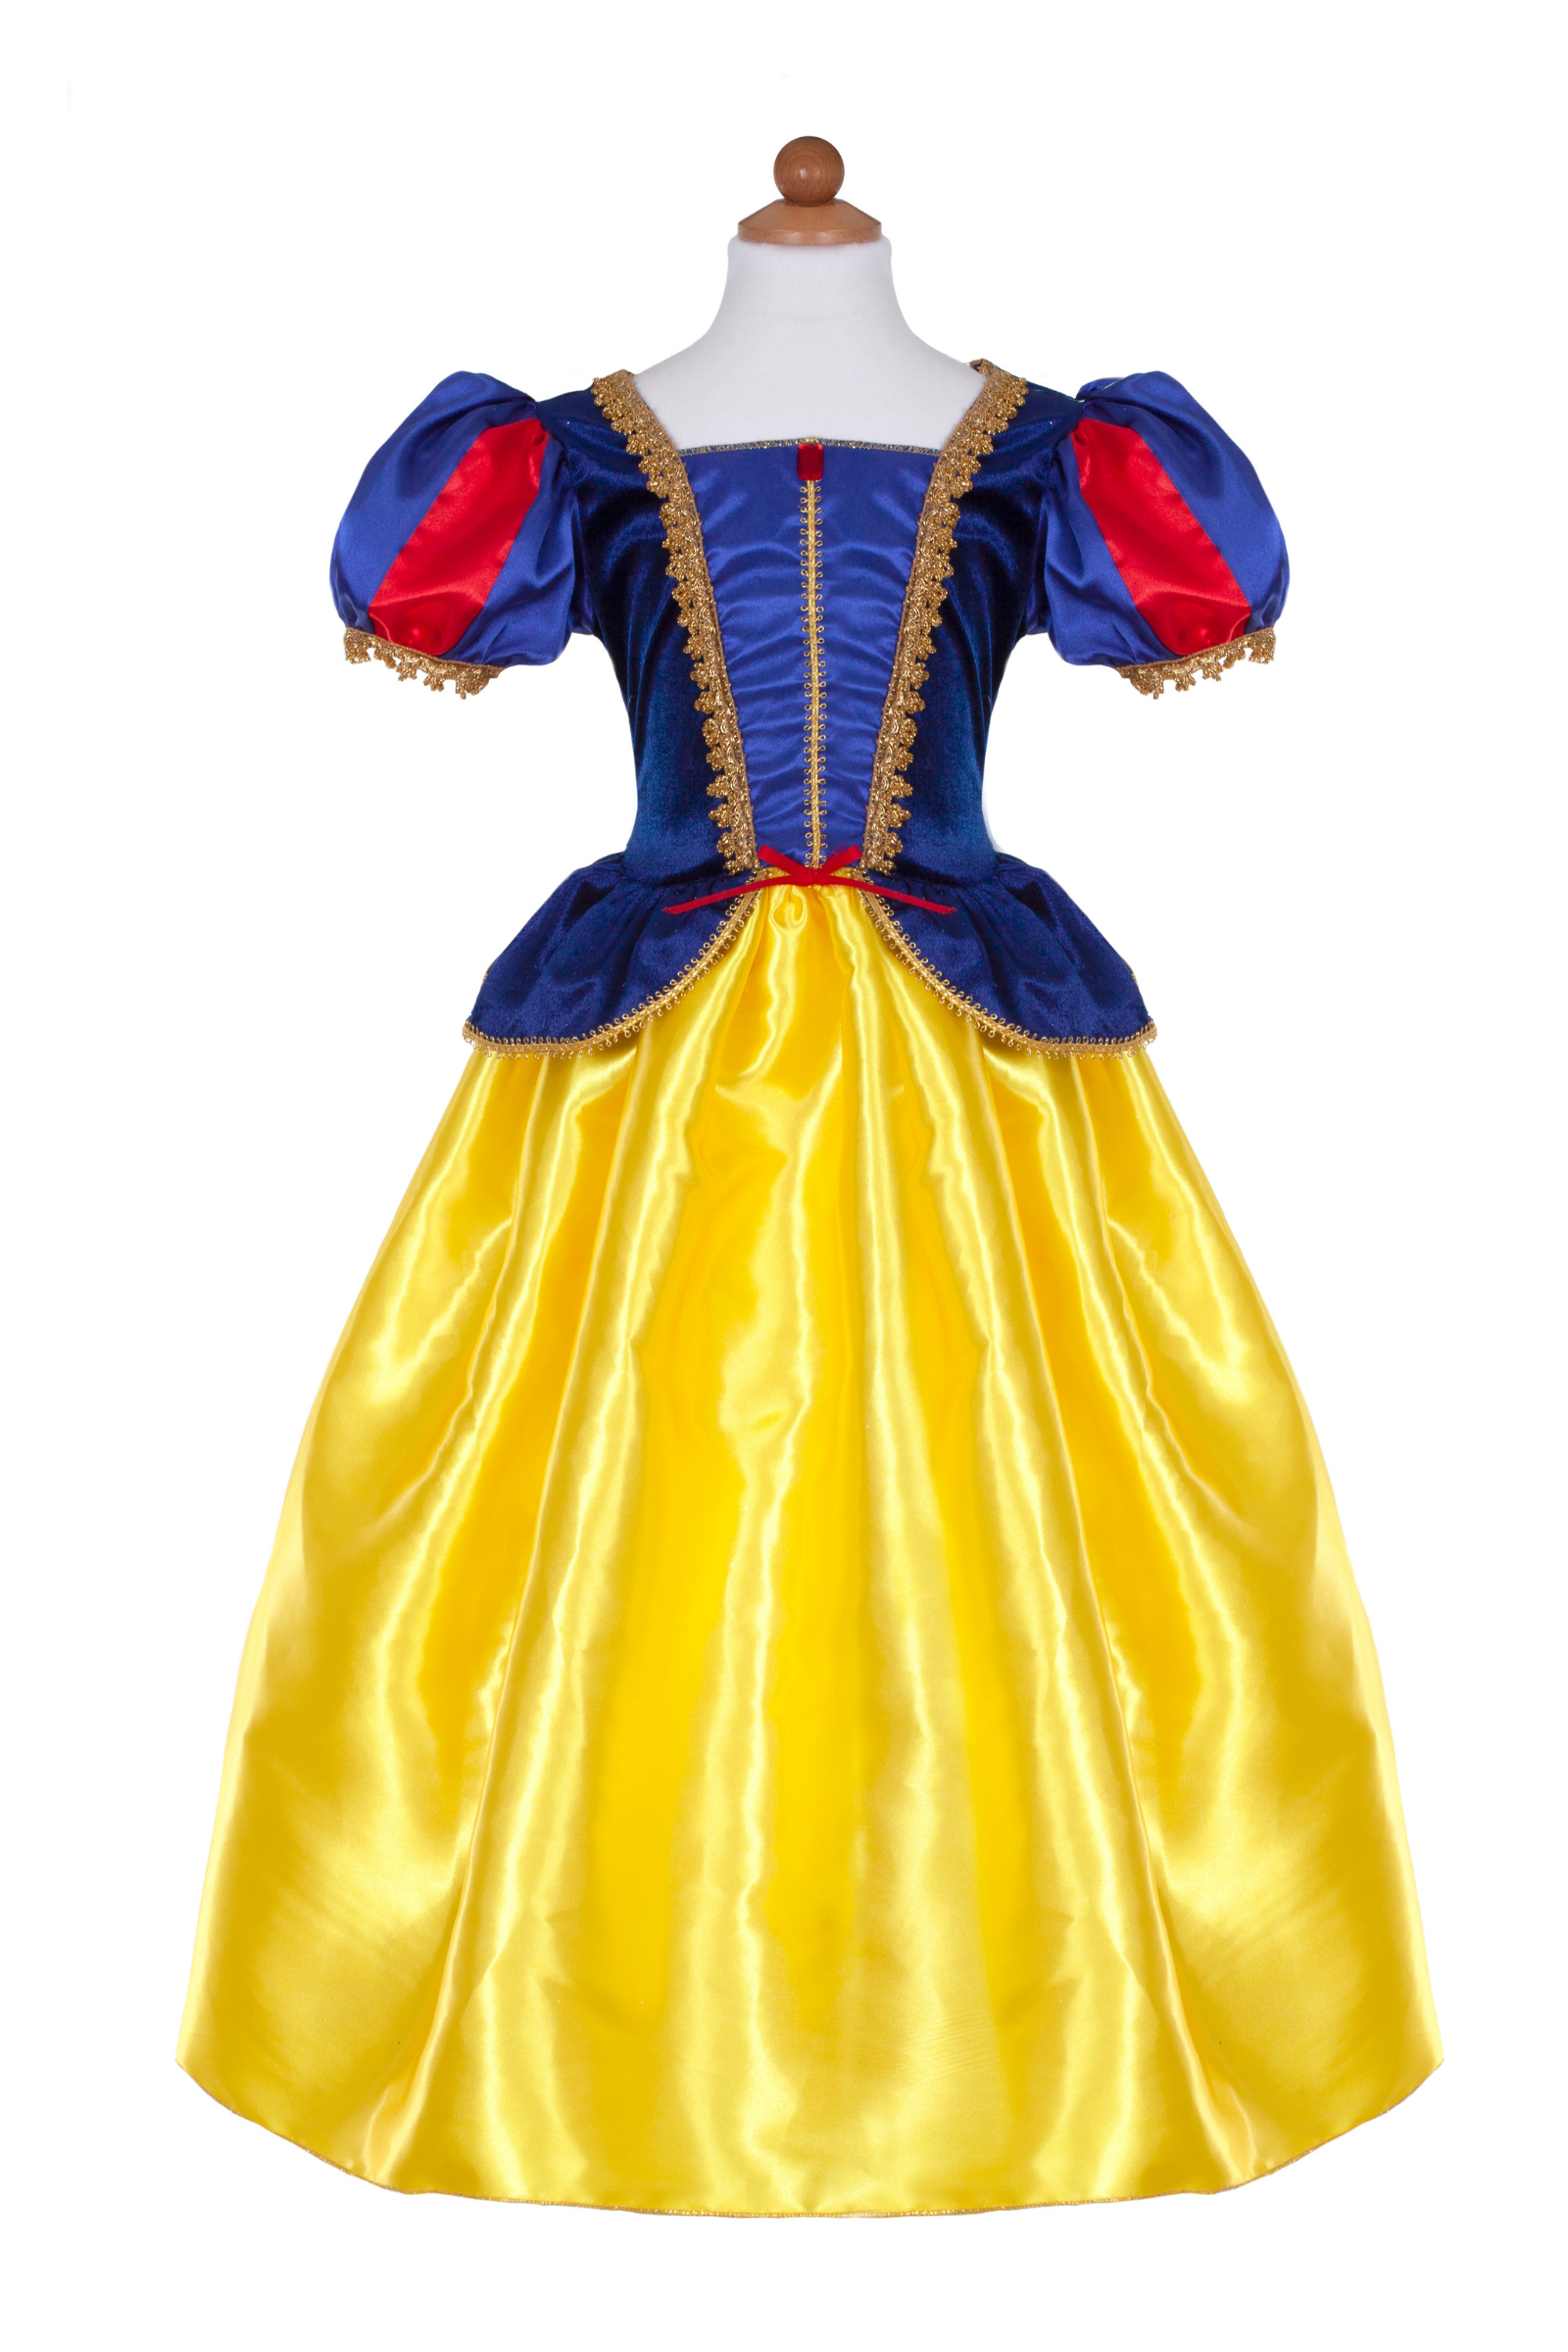 My day as Snow White - Chronically Overdressed